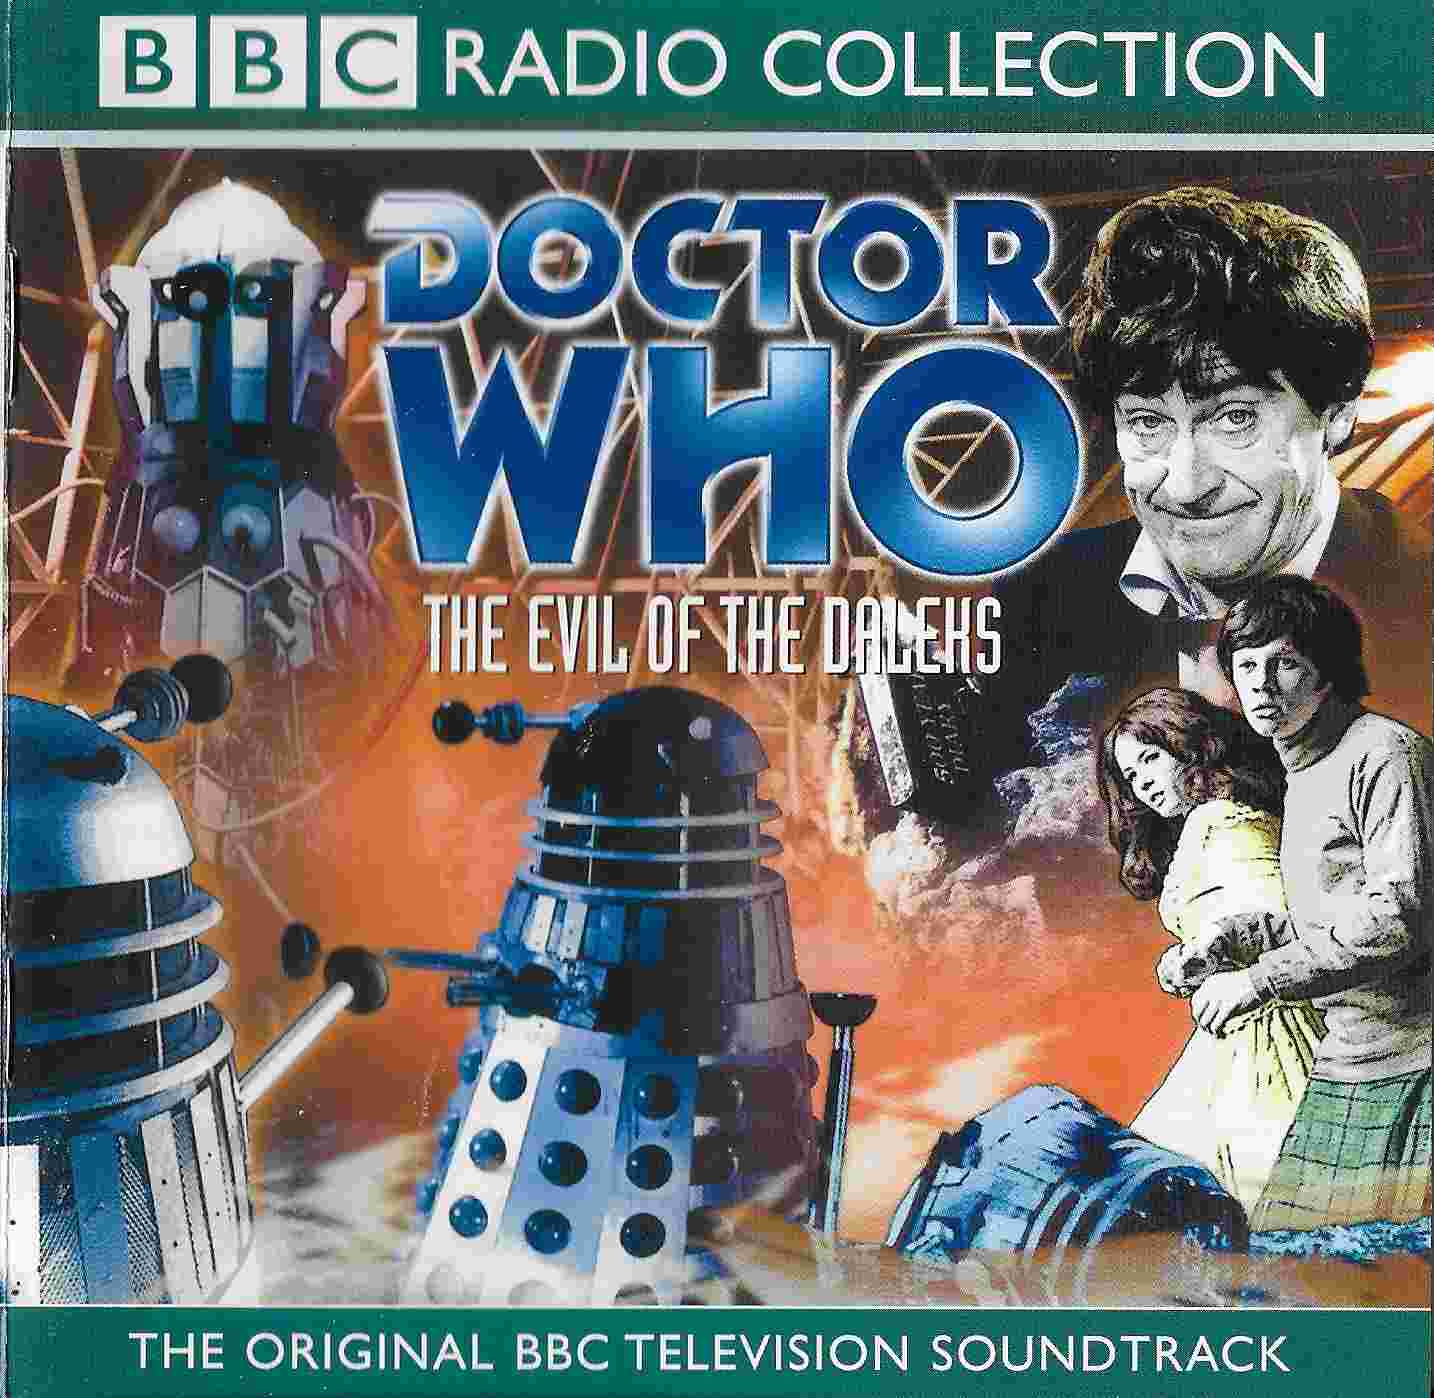 Picture of ISBN 0-563-49476-X2 Doctor Who - The evil of the Daleks by artist David Whitaker from the BBC cds - Records and Tapes library